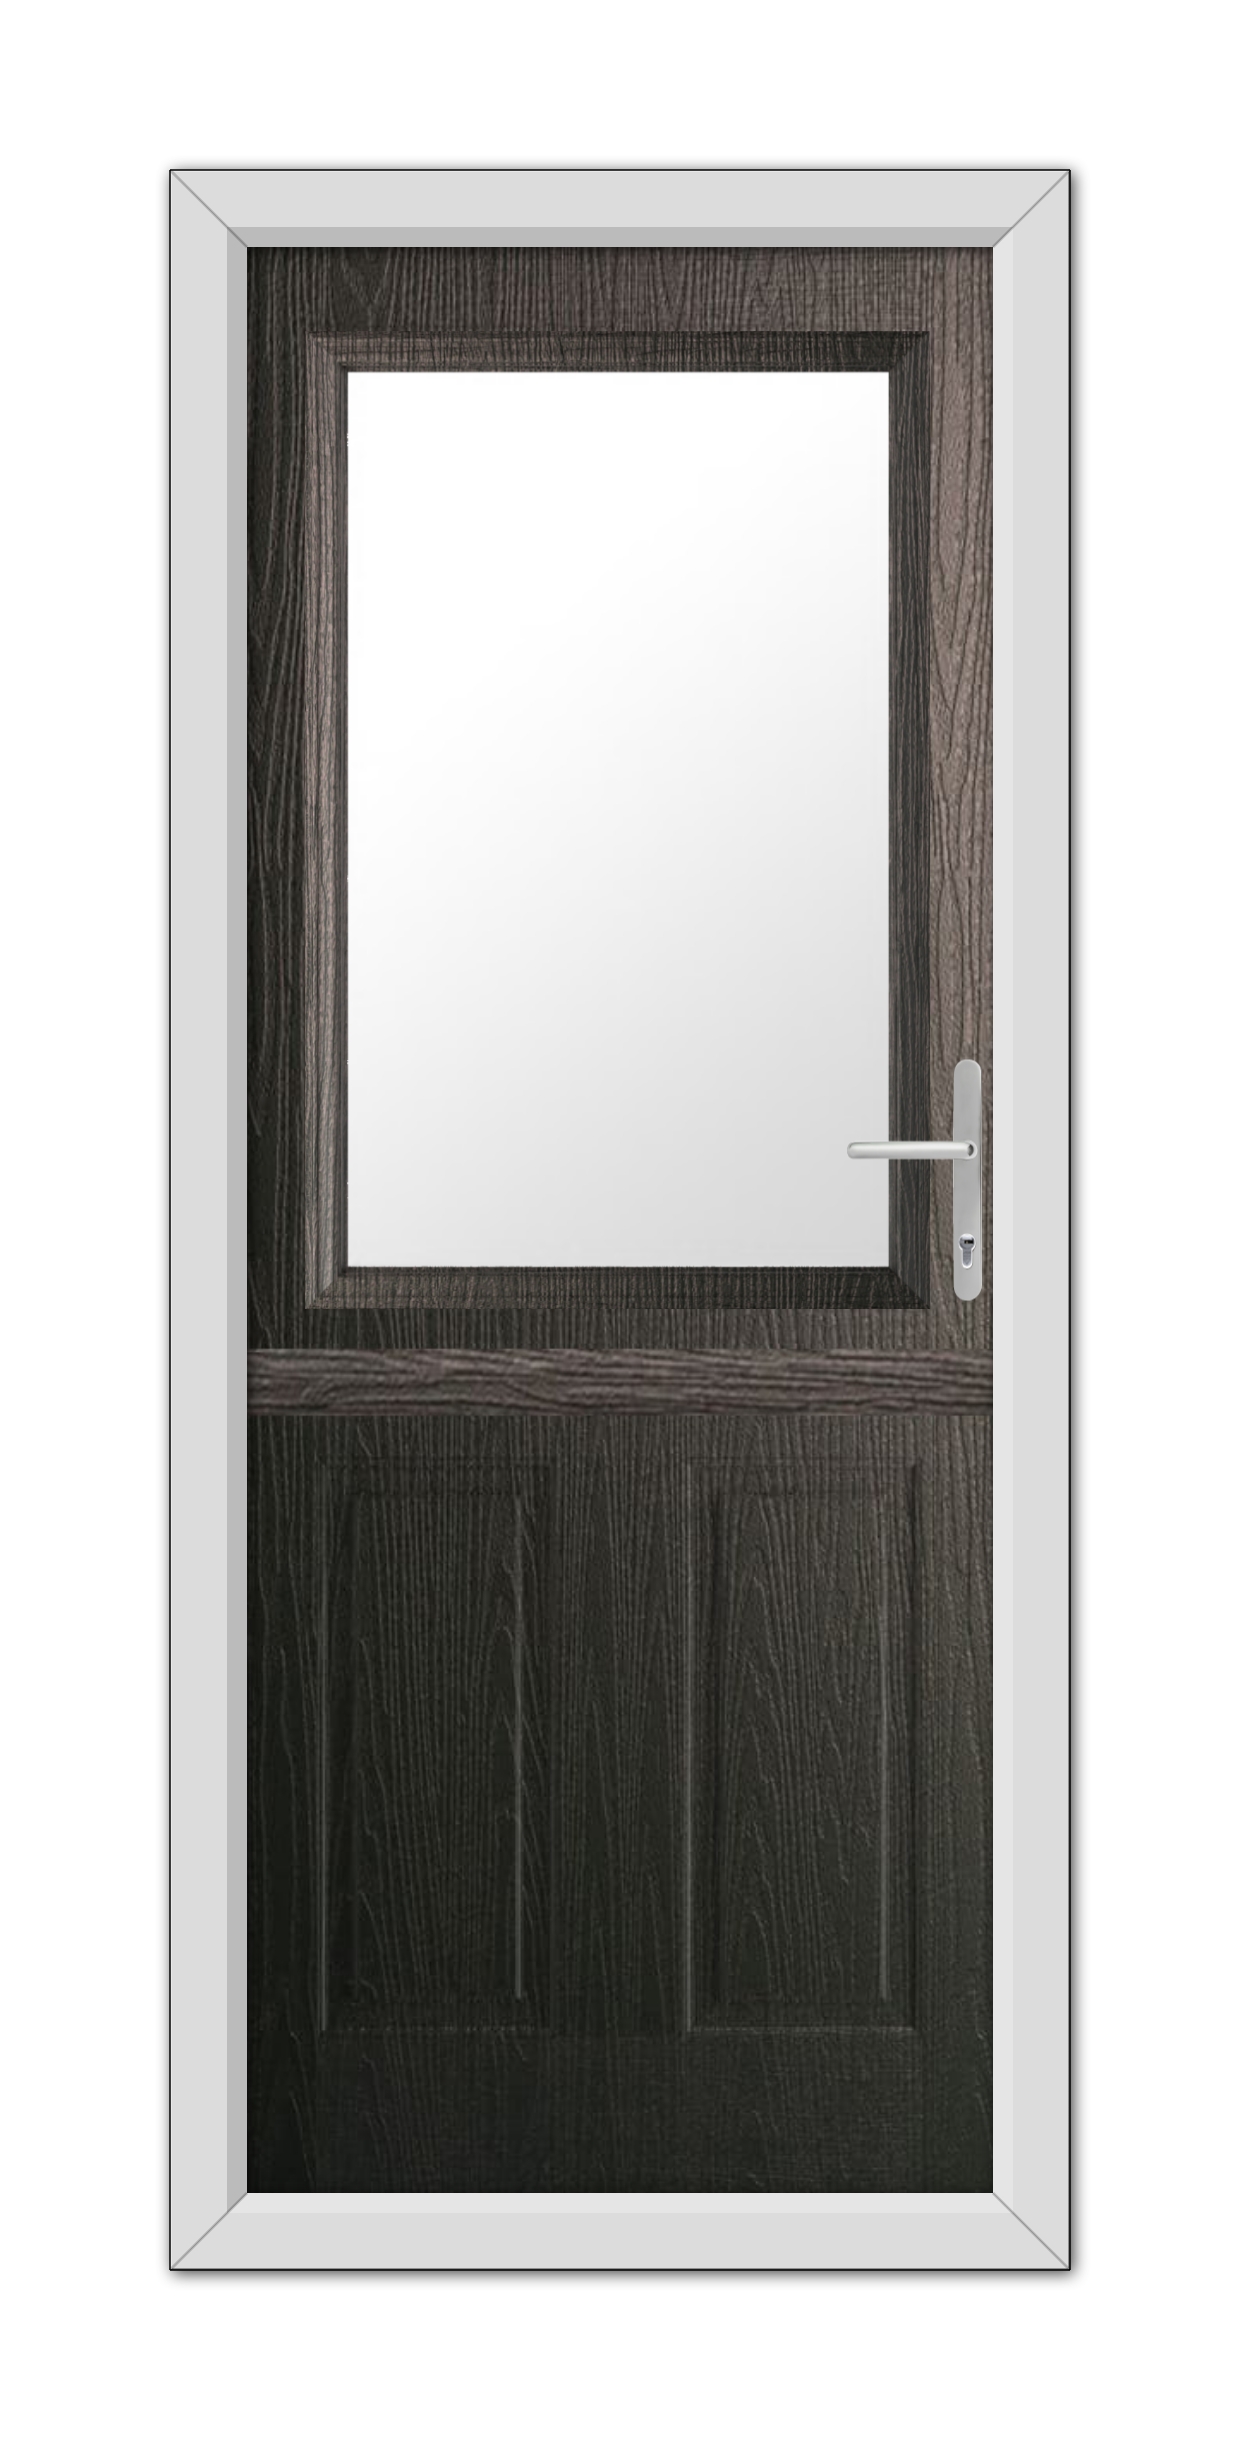 A Schwarzbraun Buxton Stable Composite Door 48mm Timber Core with a square glass window and a metallic door handle, set within a light gray frame, isolated on a white background.